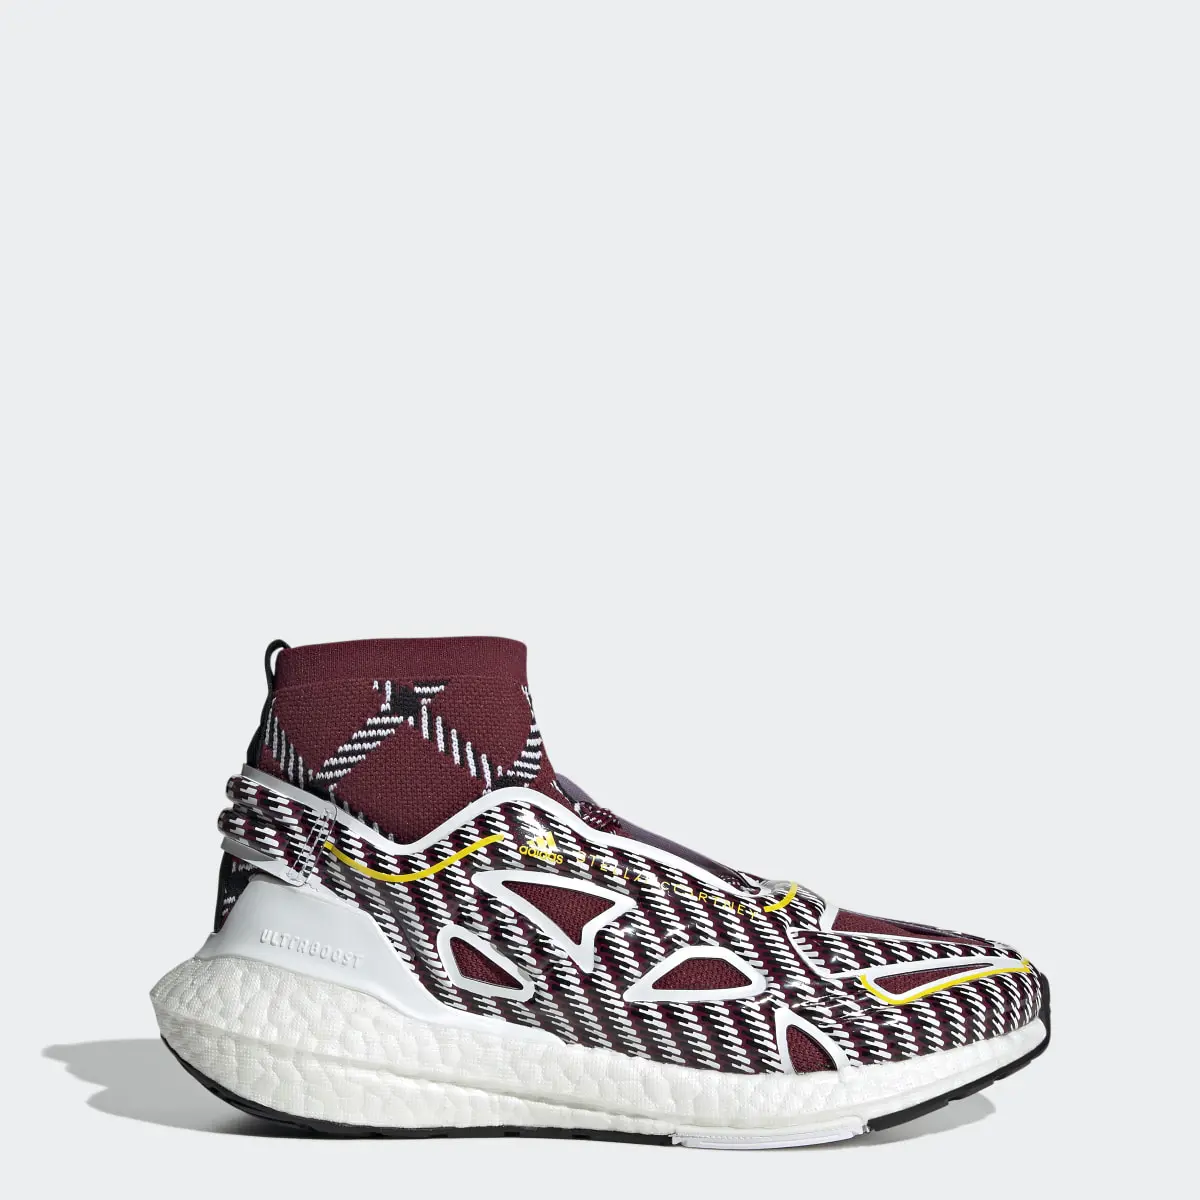 Adidas by Stella McCartney Ultraboost 22 Elevated Shoes. 1